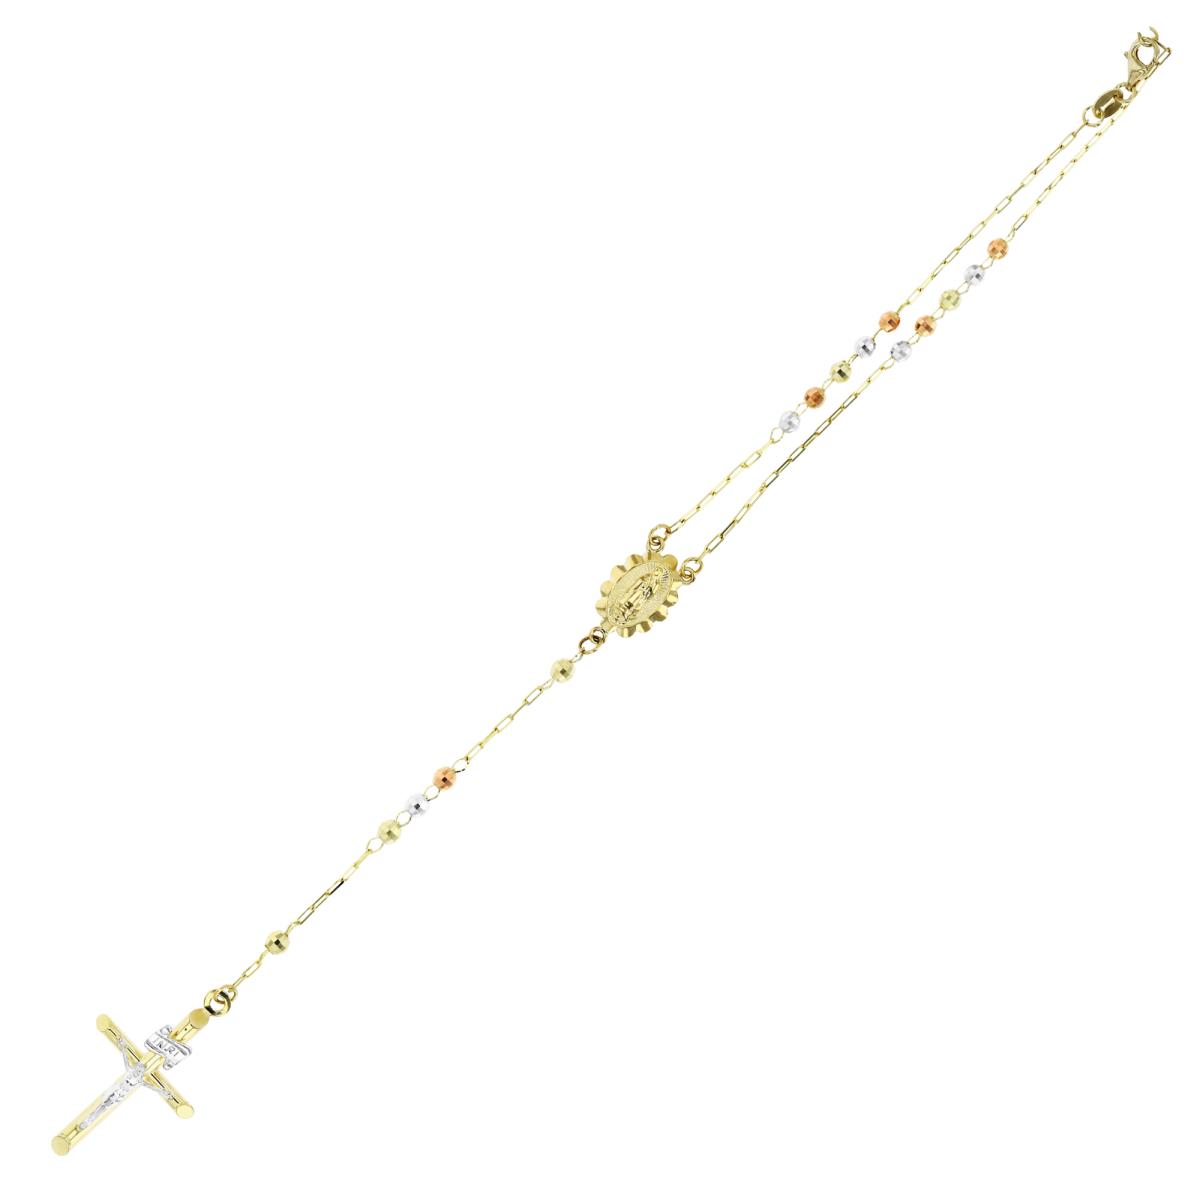 14K Gold Tricolor 3MM Diamond Cut Beads Rosary Necklace